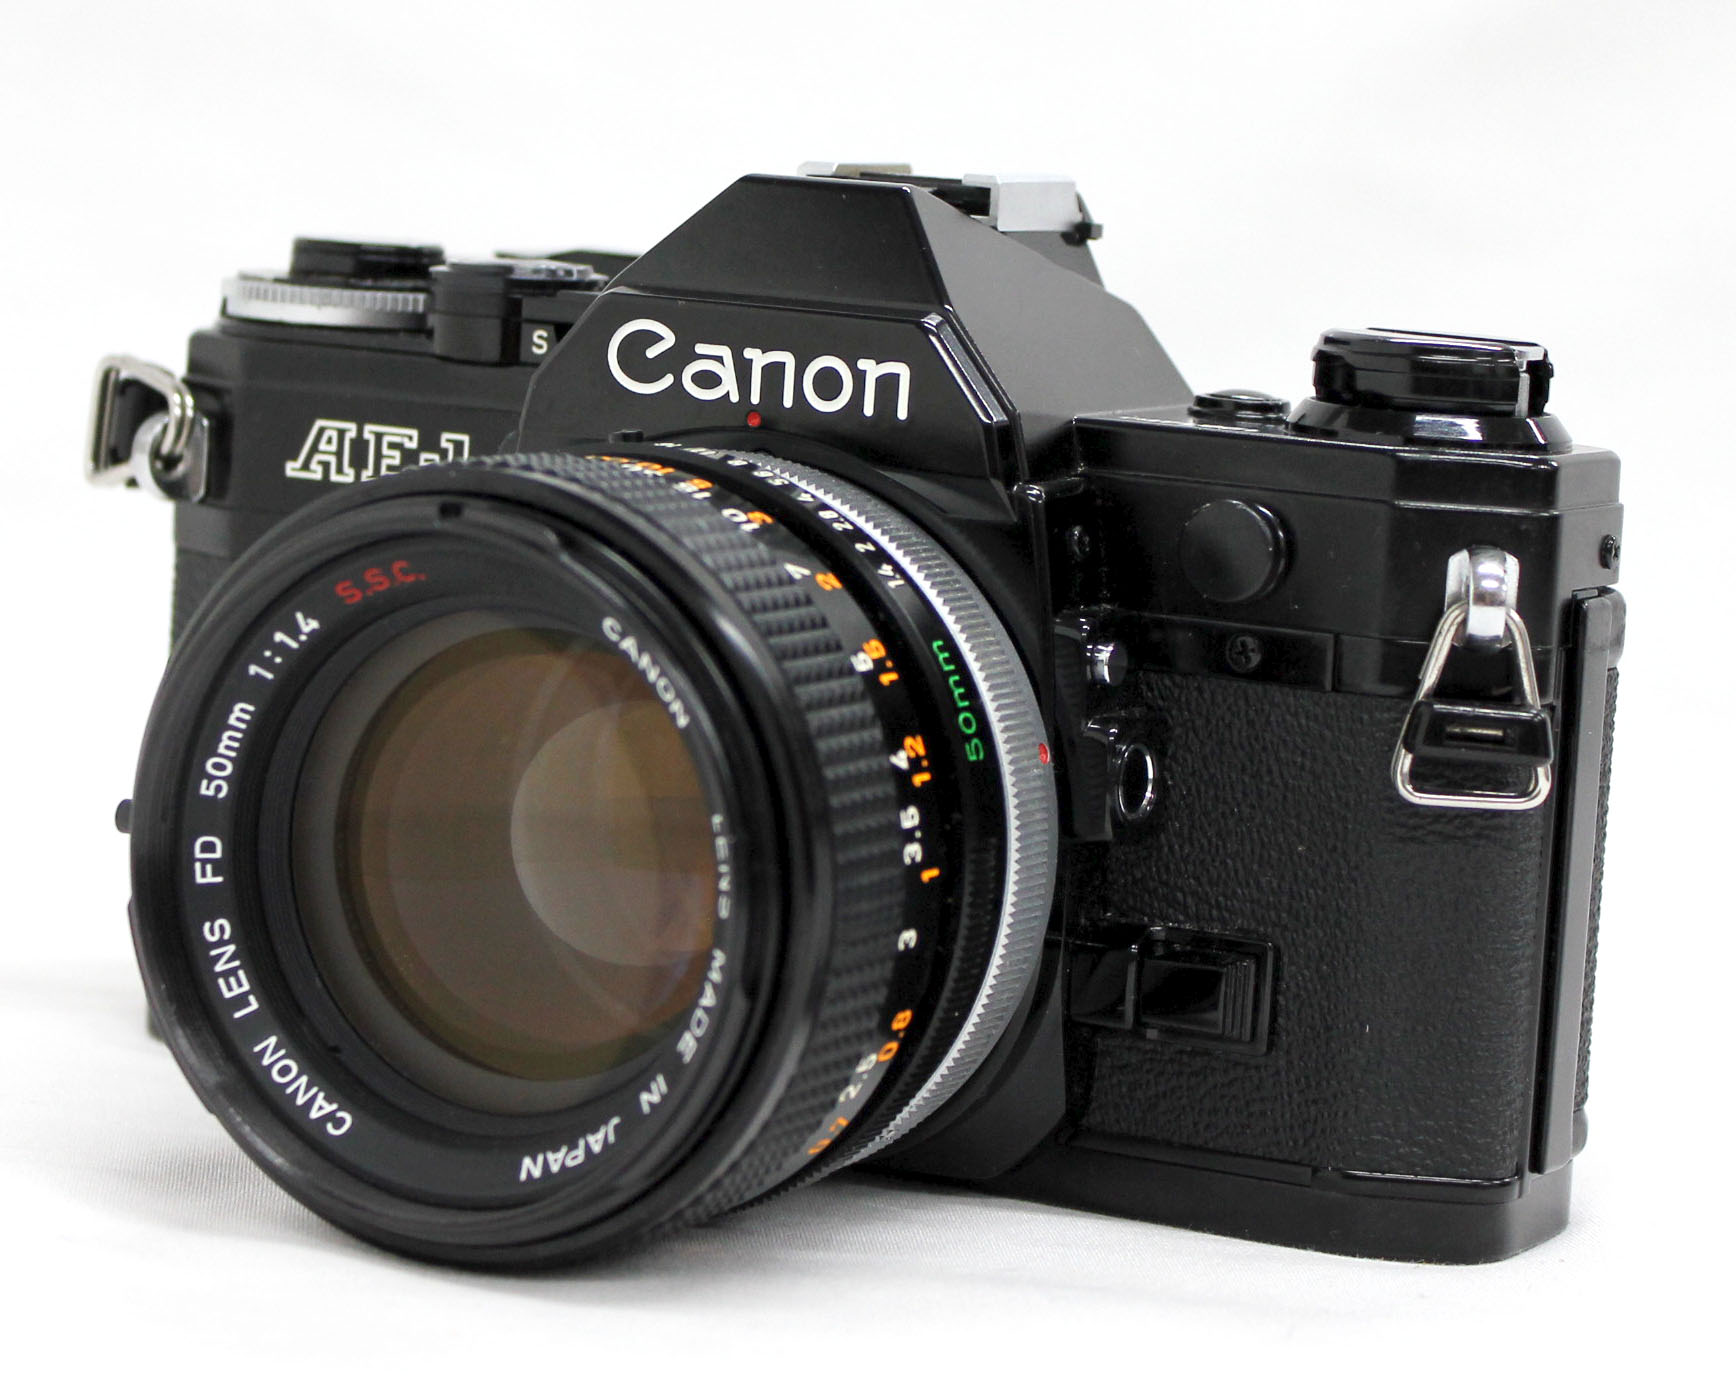 Canon AE-1 35mm SLR Camera Black with FD 50mm F/1.4 S.S.C. Lens from Japan